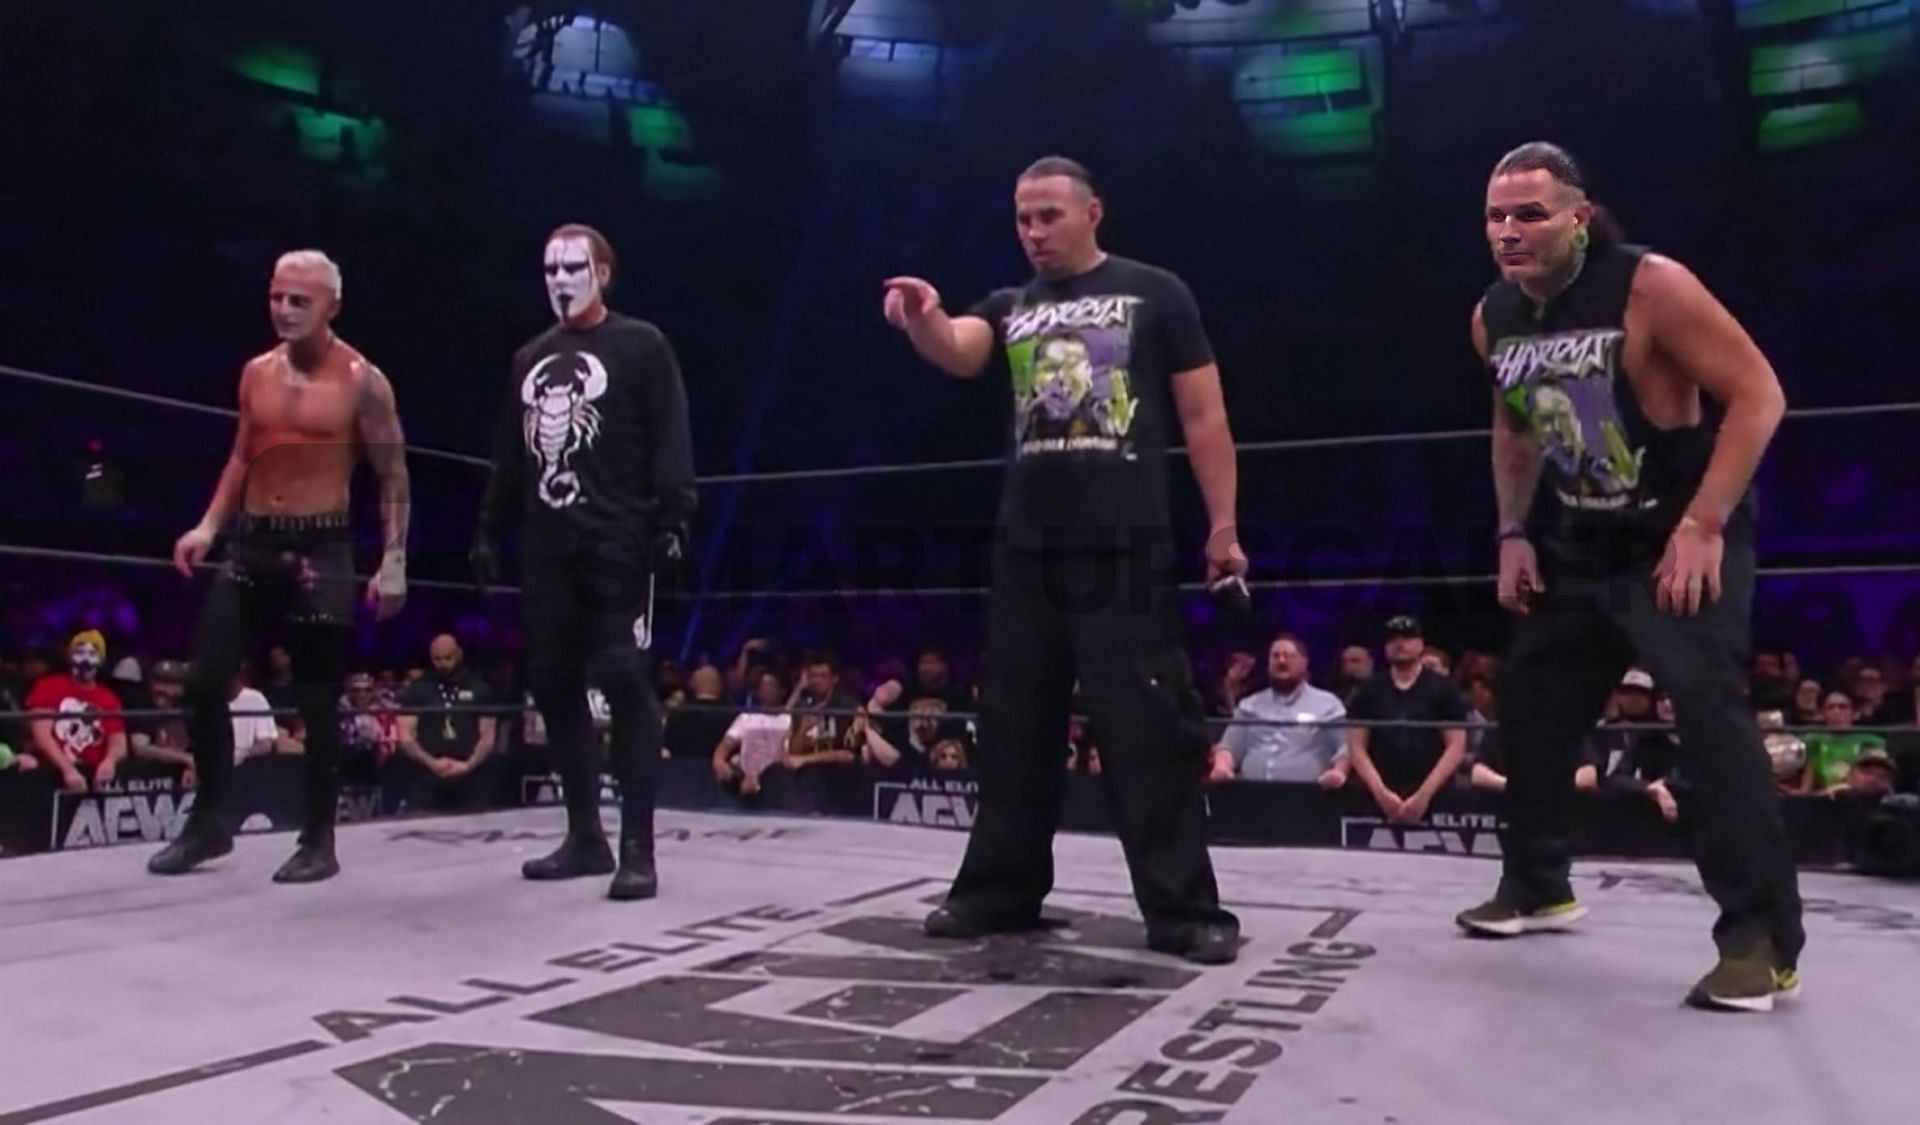 Dynamite gave the fans a dream tag team this week.